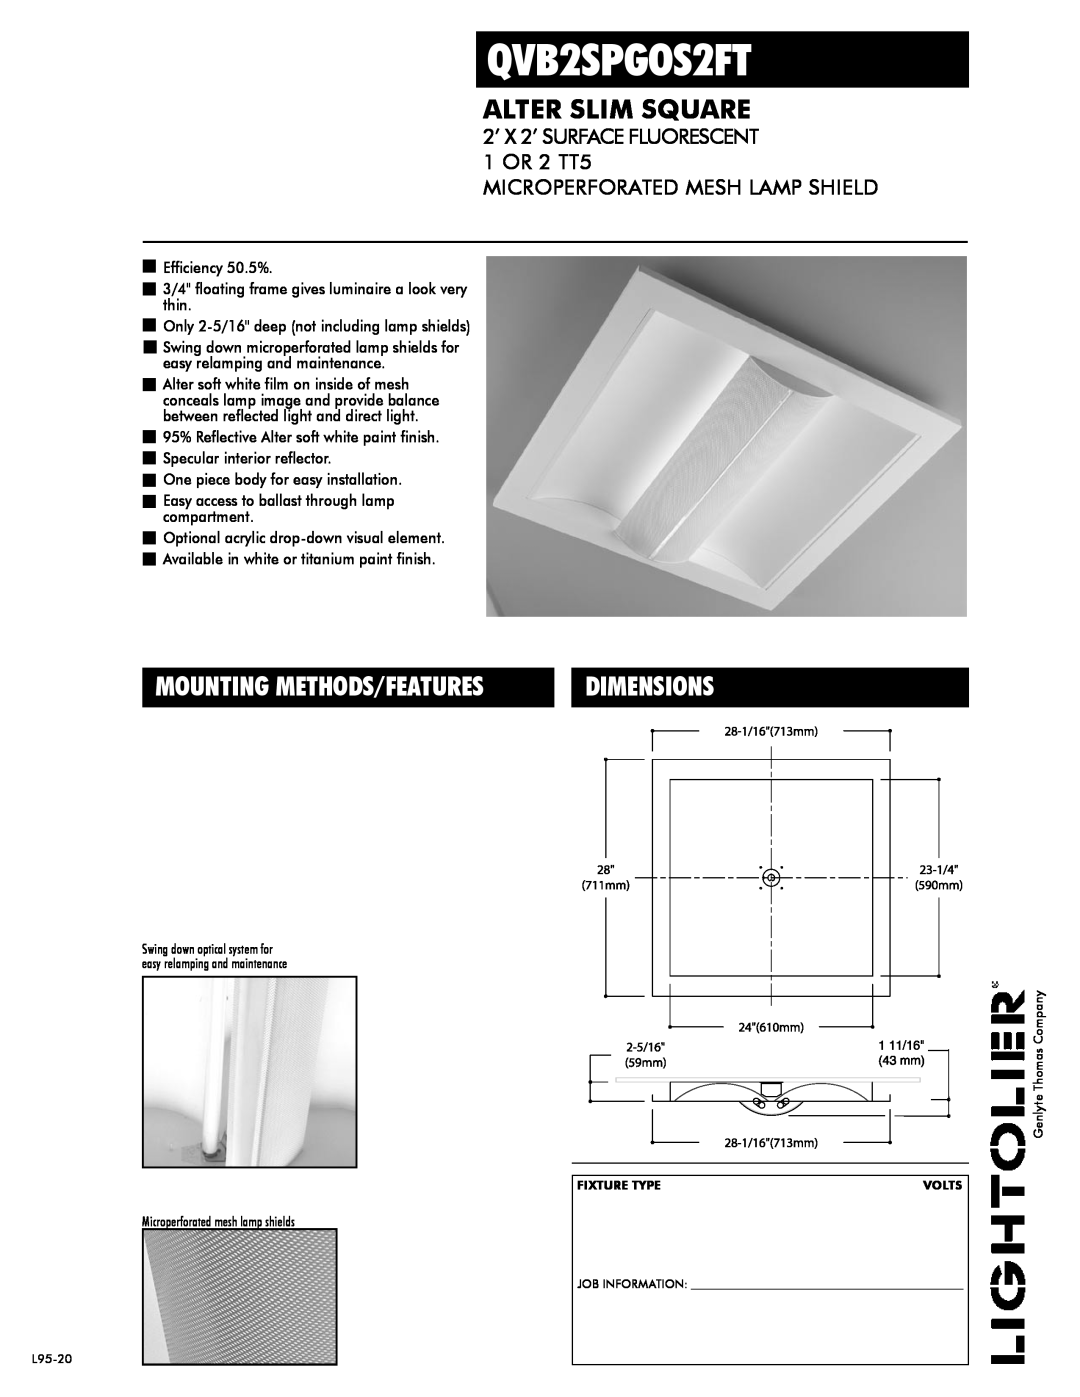 Lightolier QVB2SPGOS2FT dimensions Alter Slim Square, Dimensions, Mounting Methods/Features 